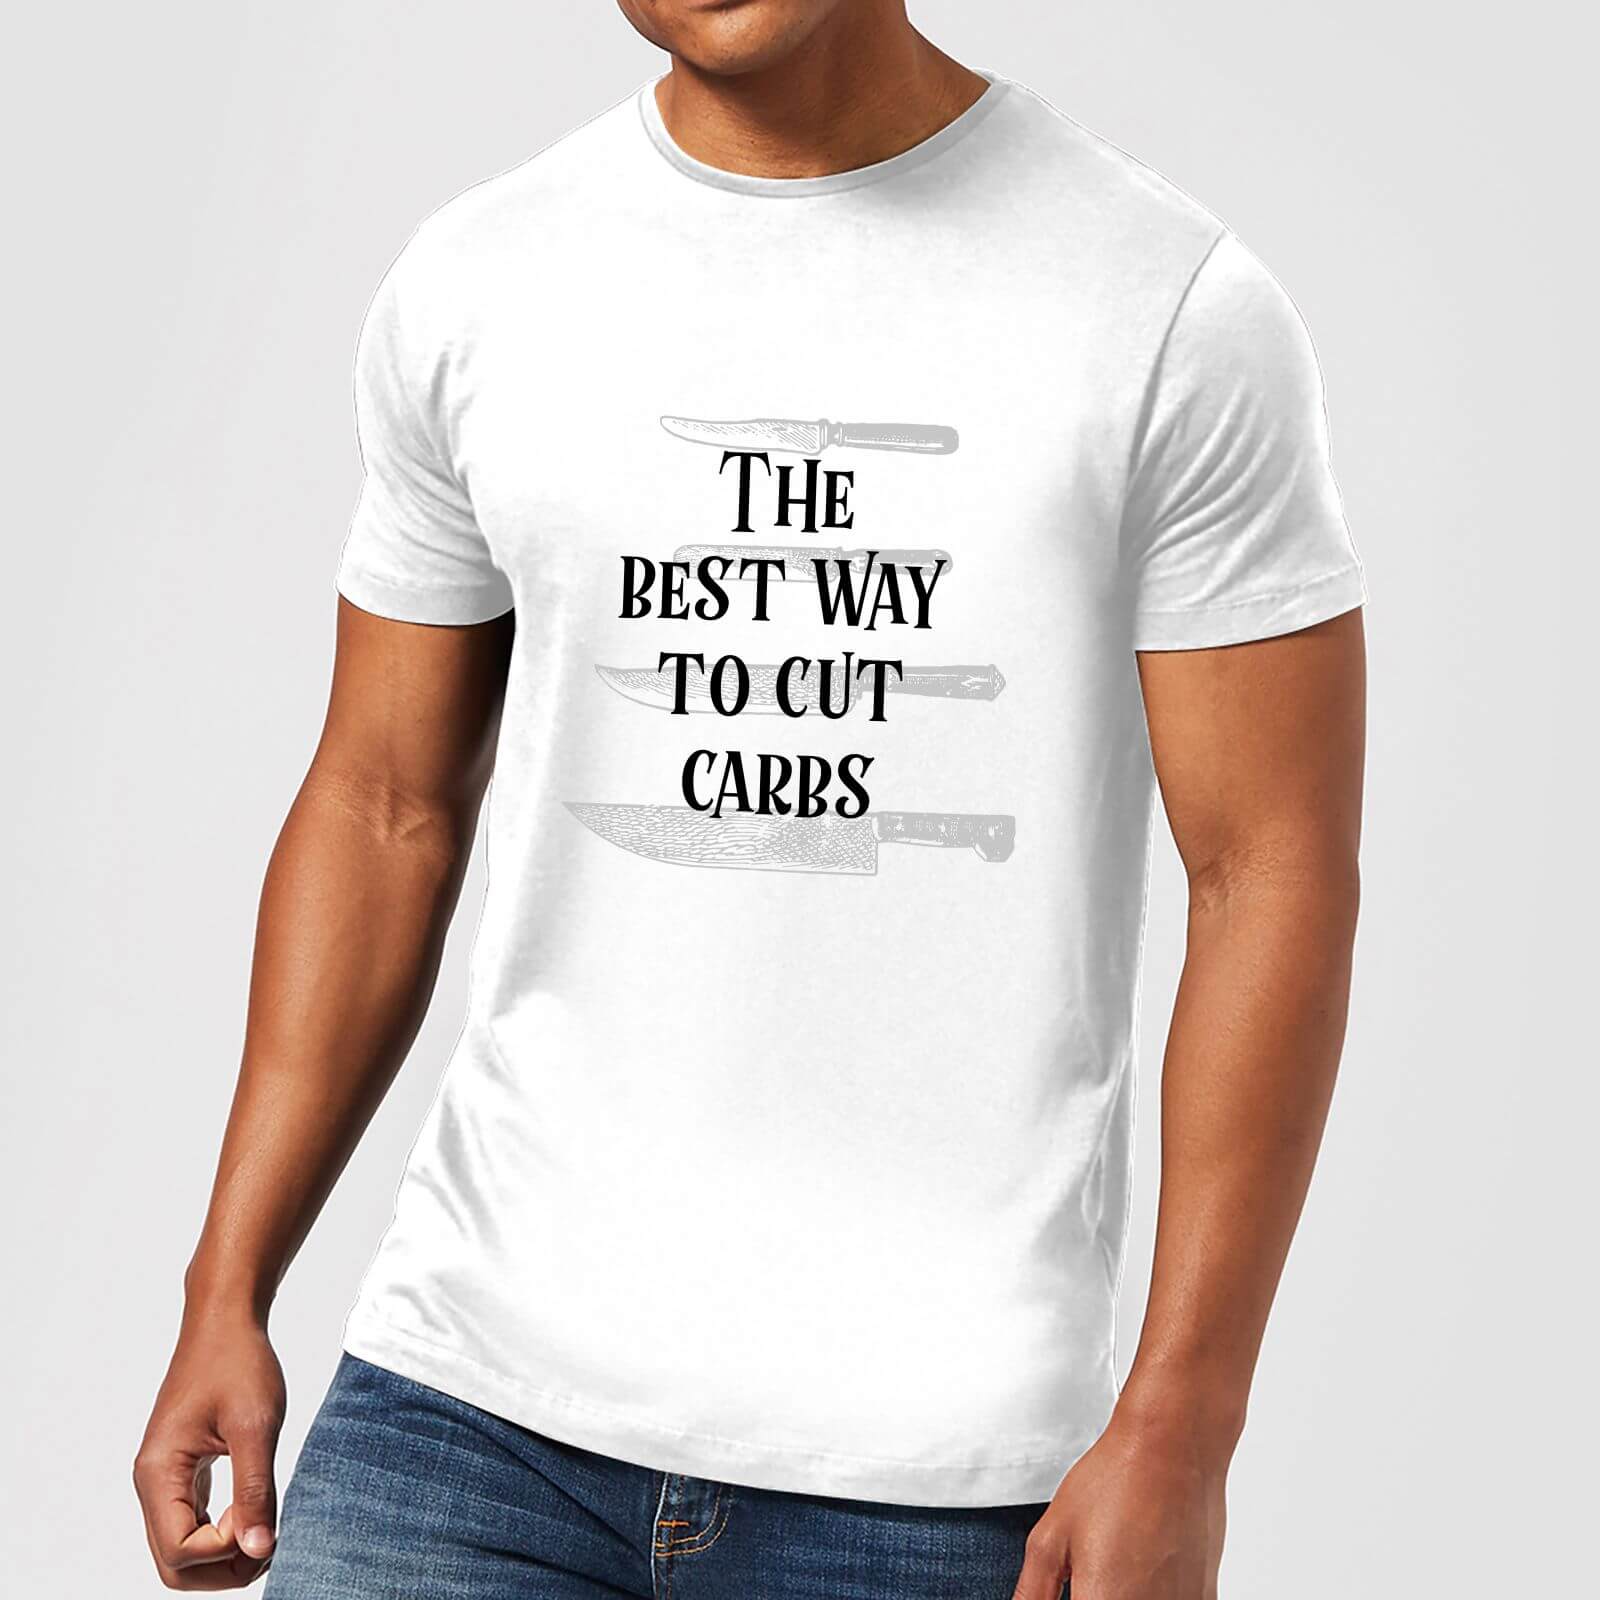 The Best Way To Cut Carbs T-Shirt - White - XXL - White